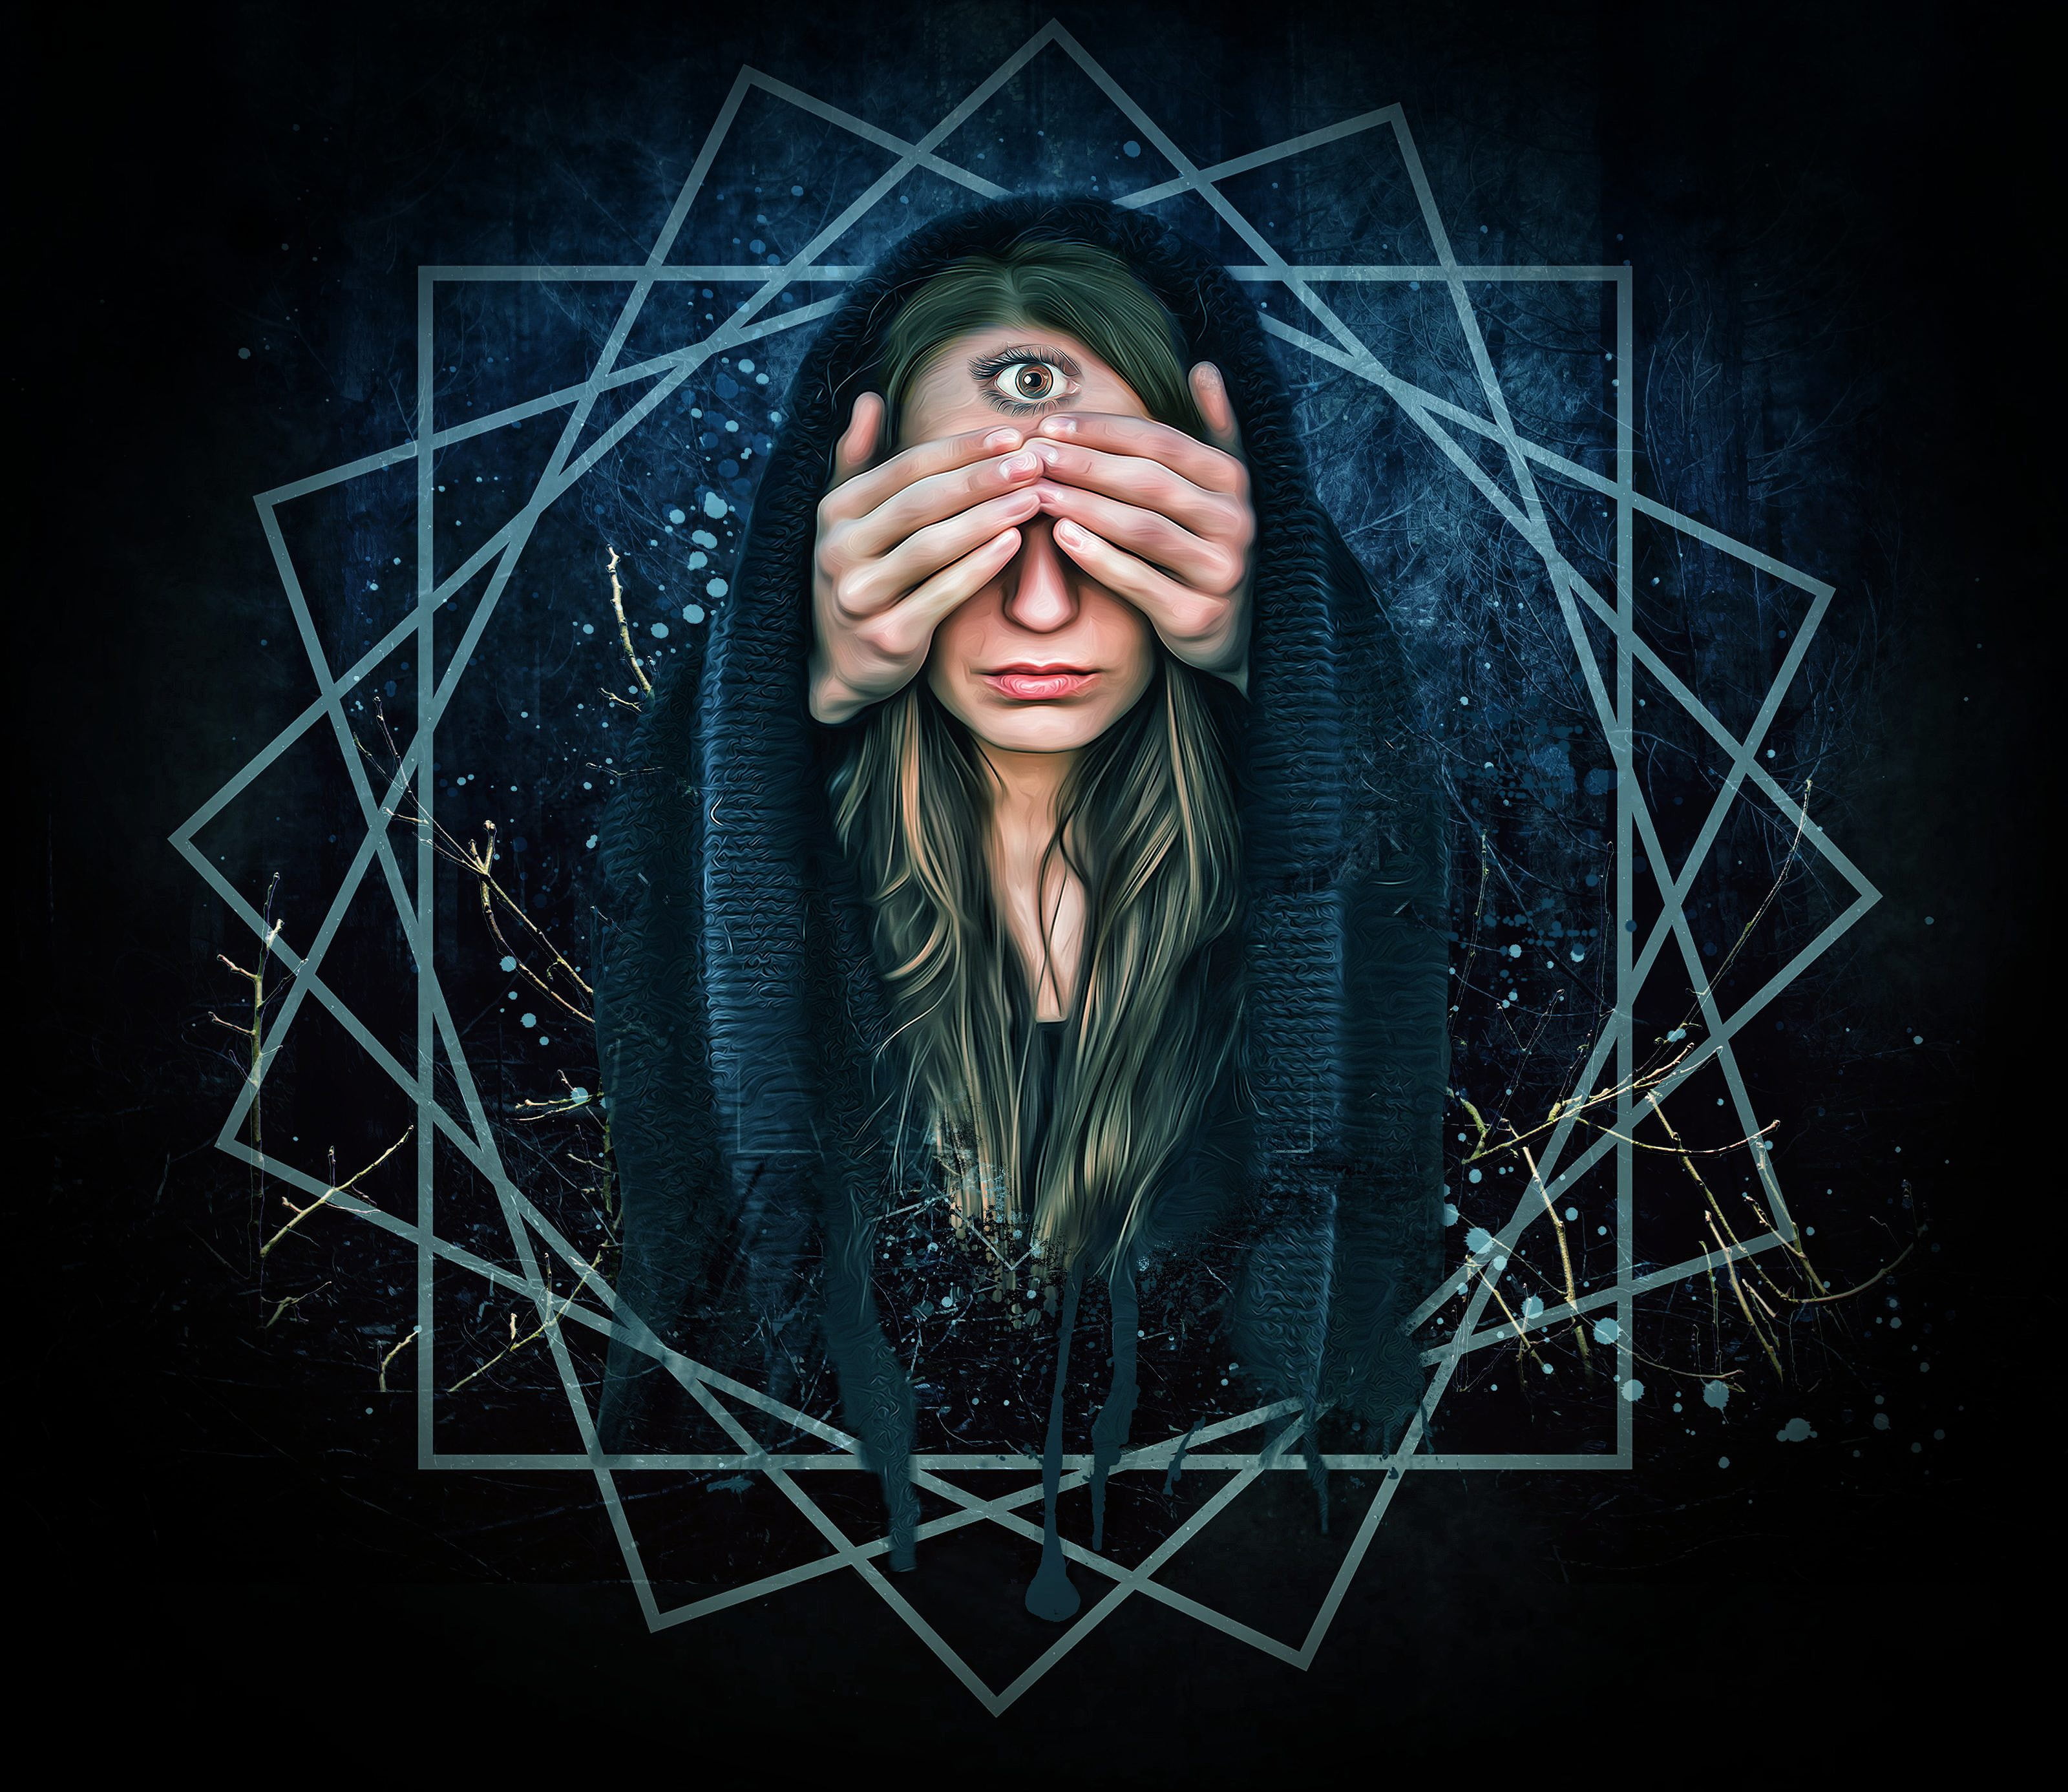 third eye, eyes, hands, art, emotion, one person, young adult